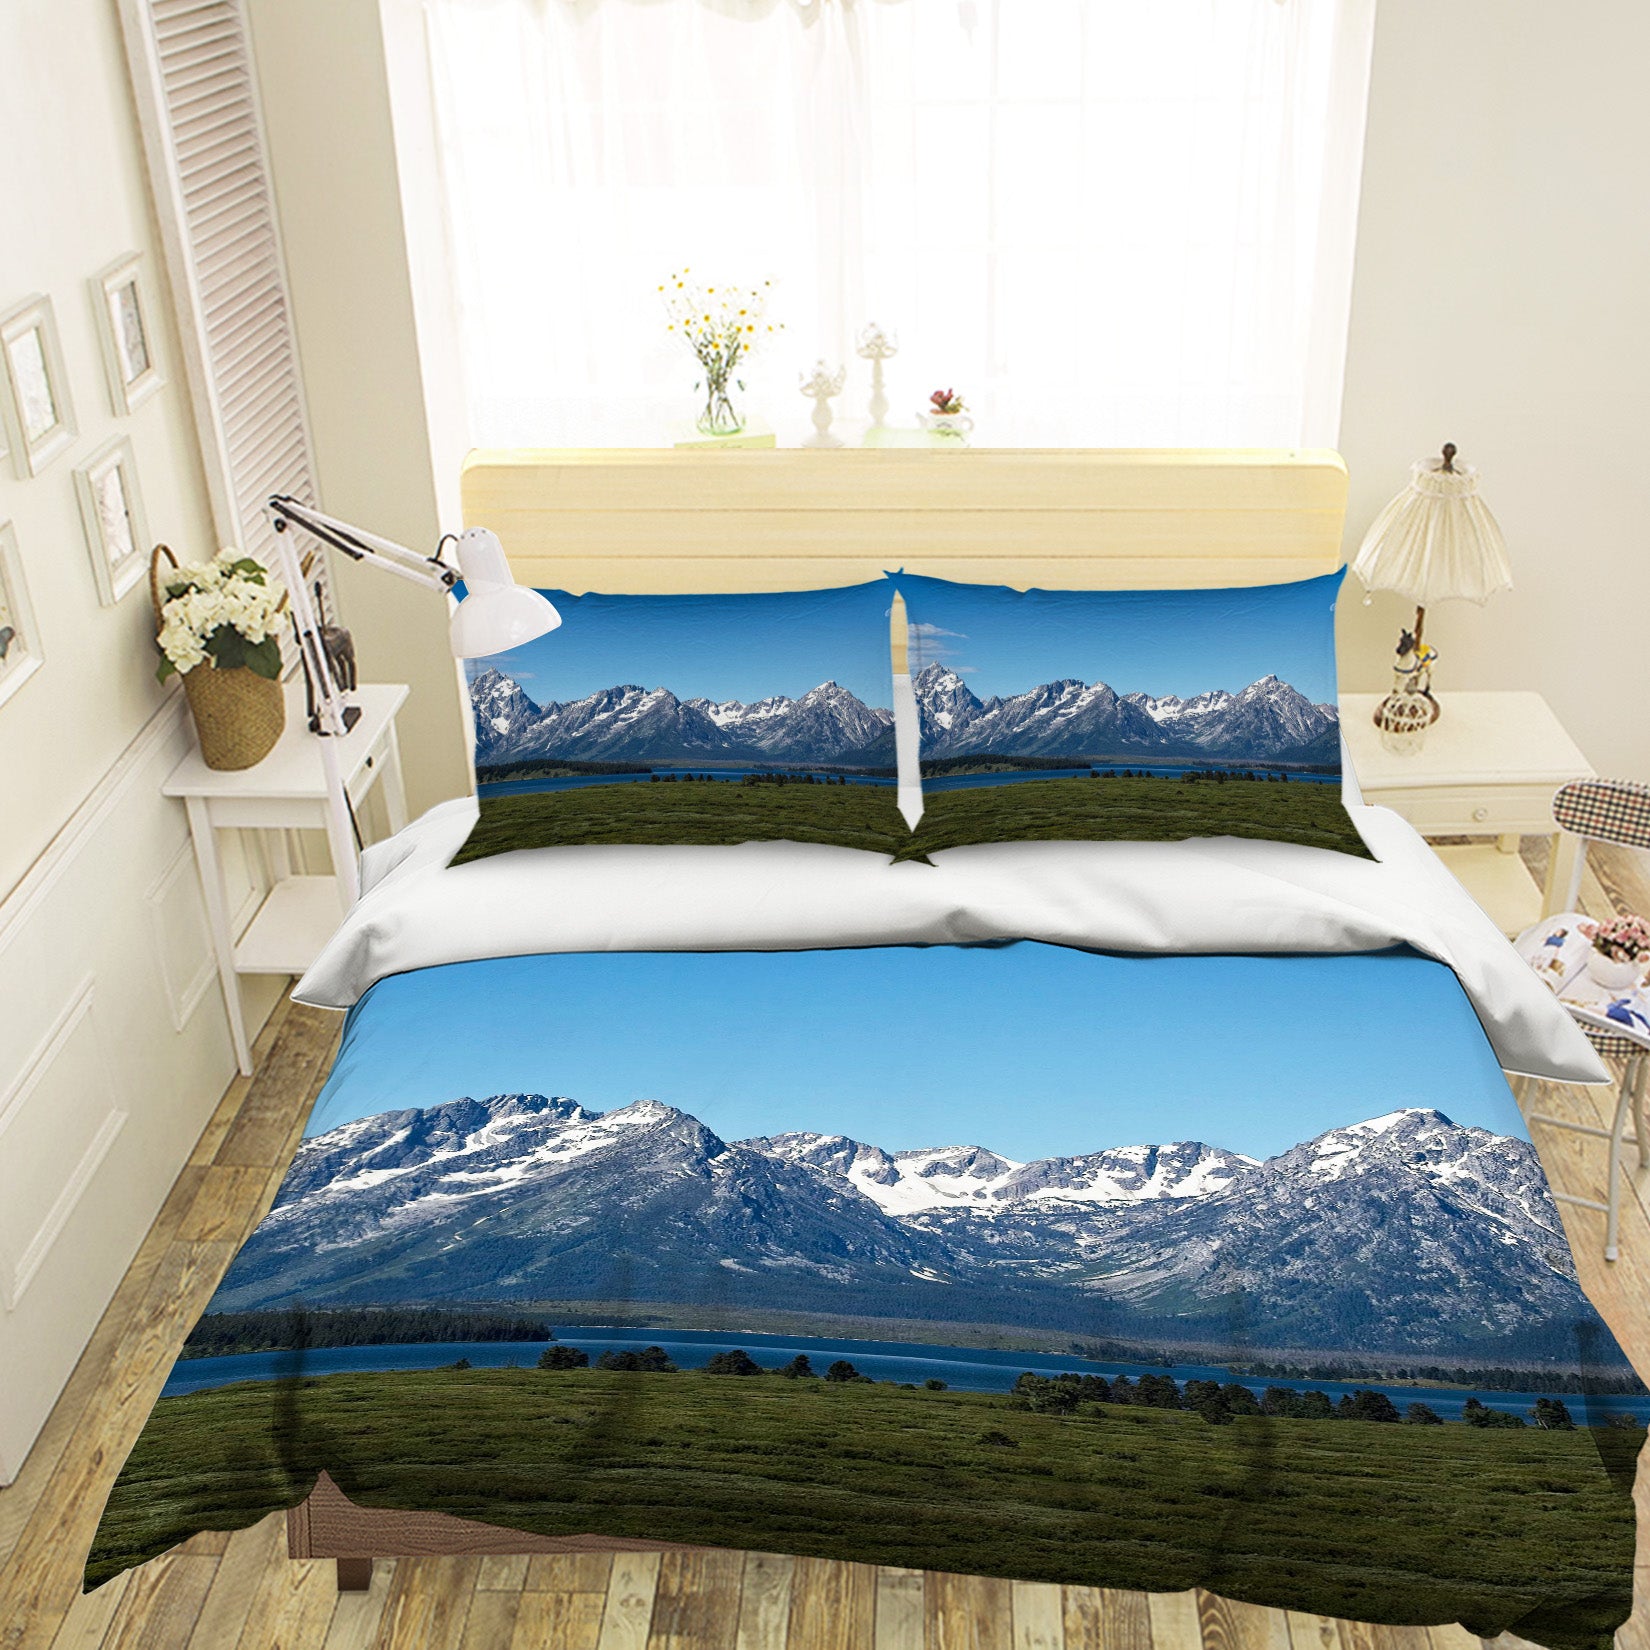 3D Snow Mountain 2121 Kathy Barefield Bedding Bed Pillowcases Quilt